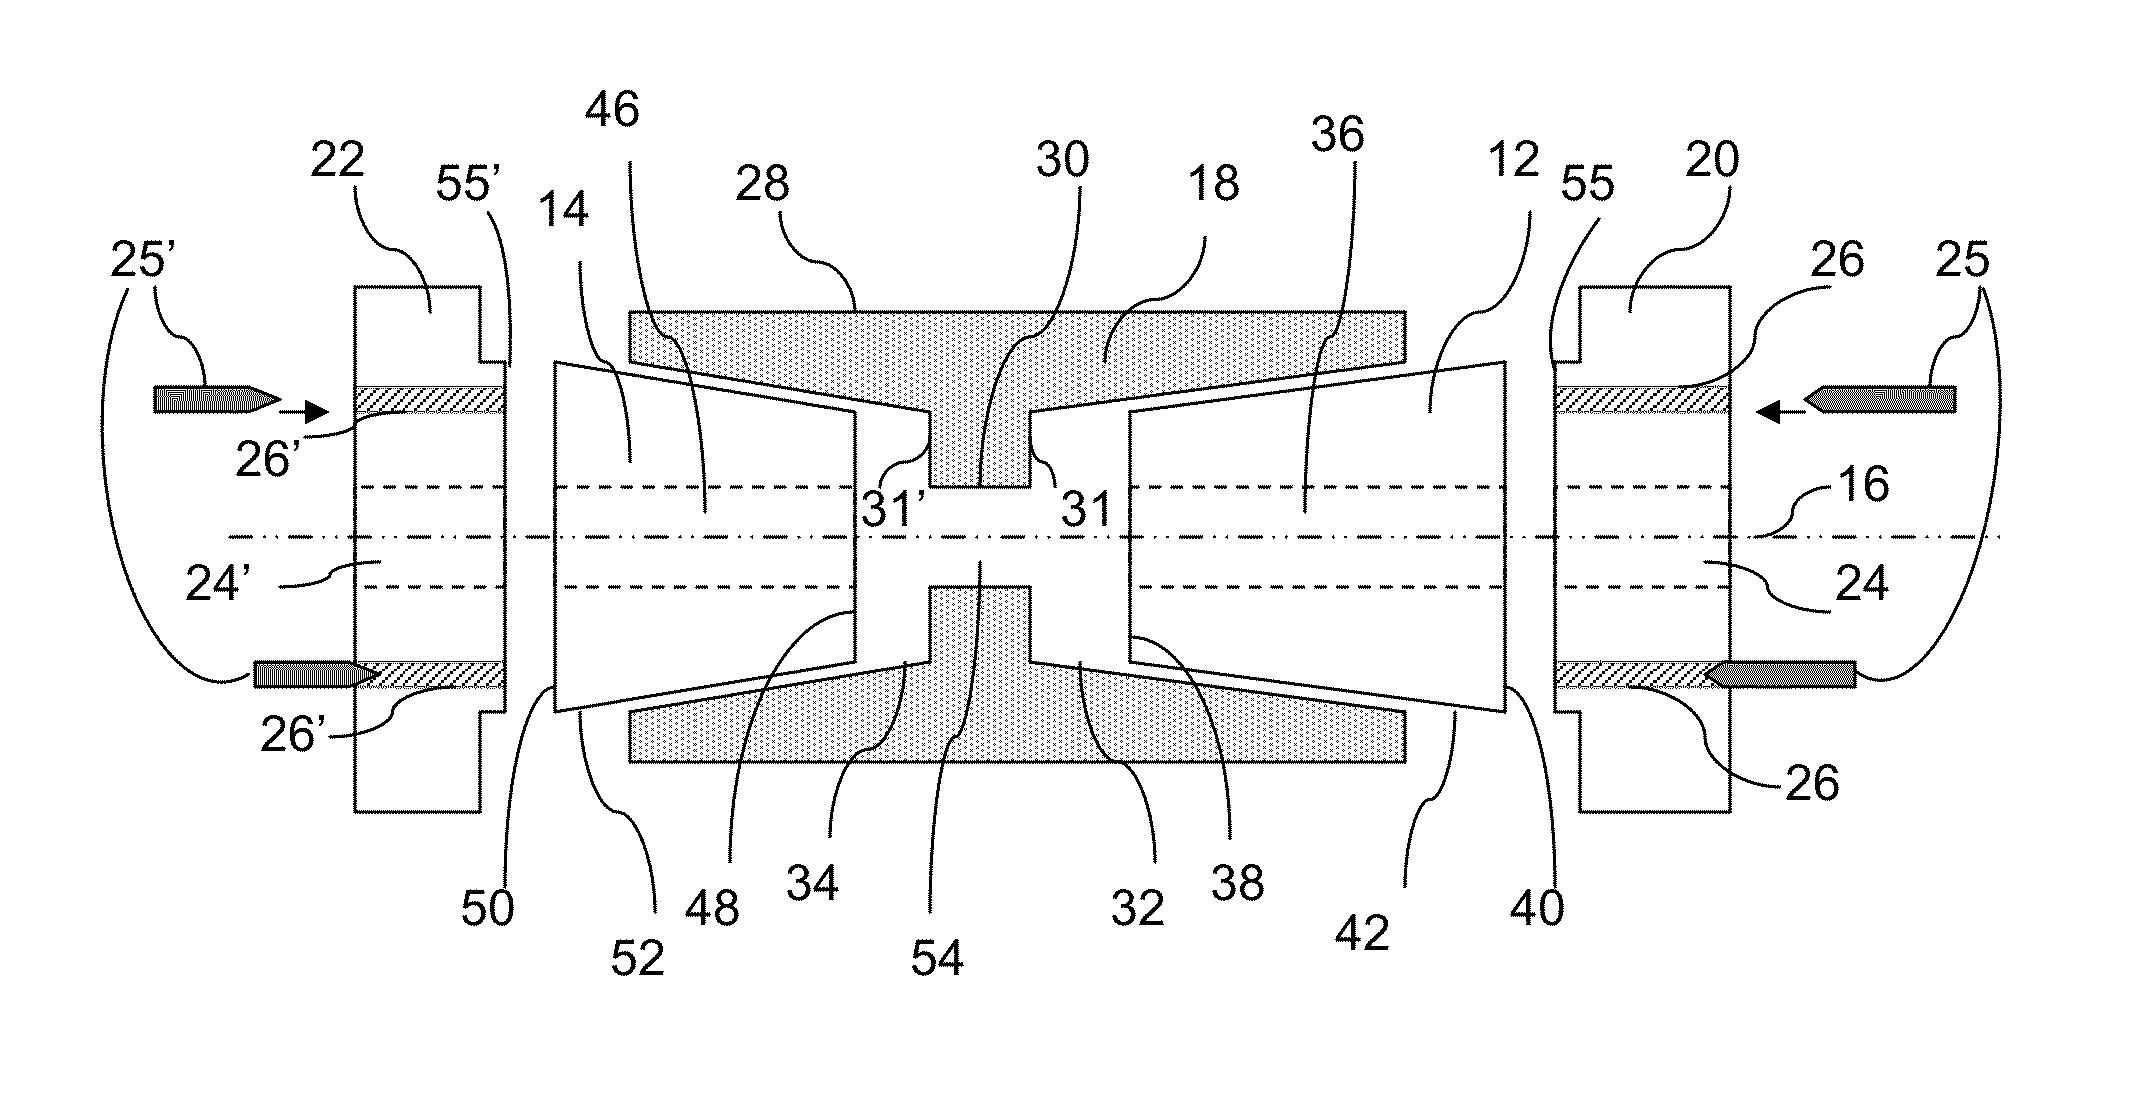 Demountable Pin and Collet Assembly and Method to Securely Fasten a Ranging Arm to a Longwall Shearer Using Such Assembly